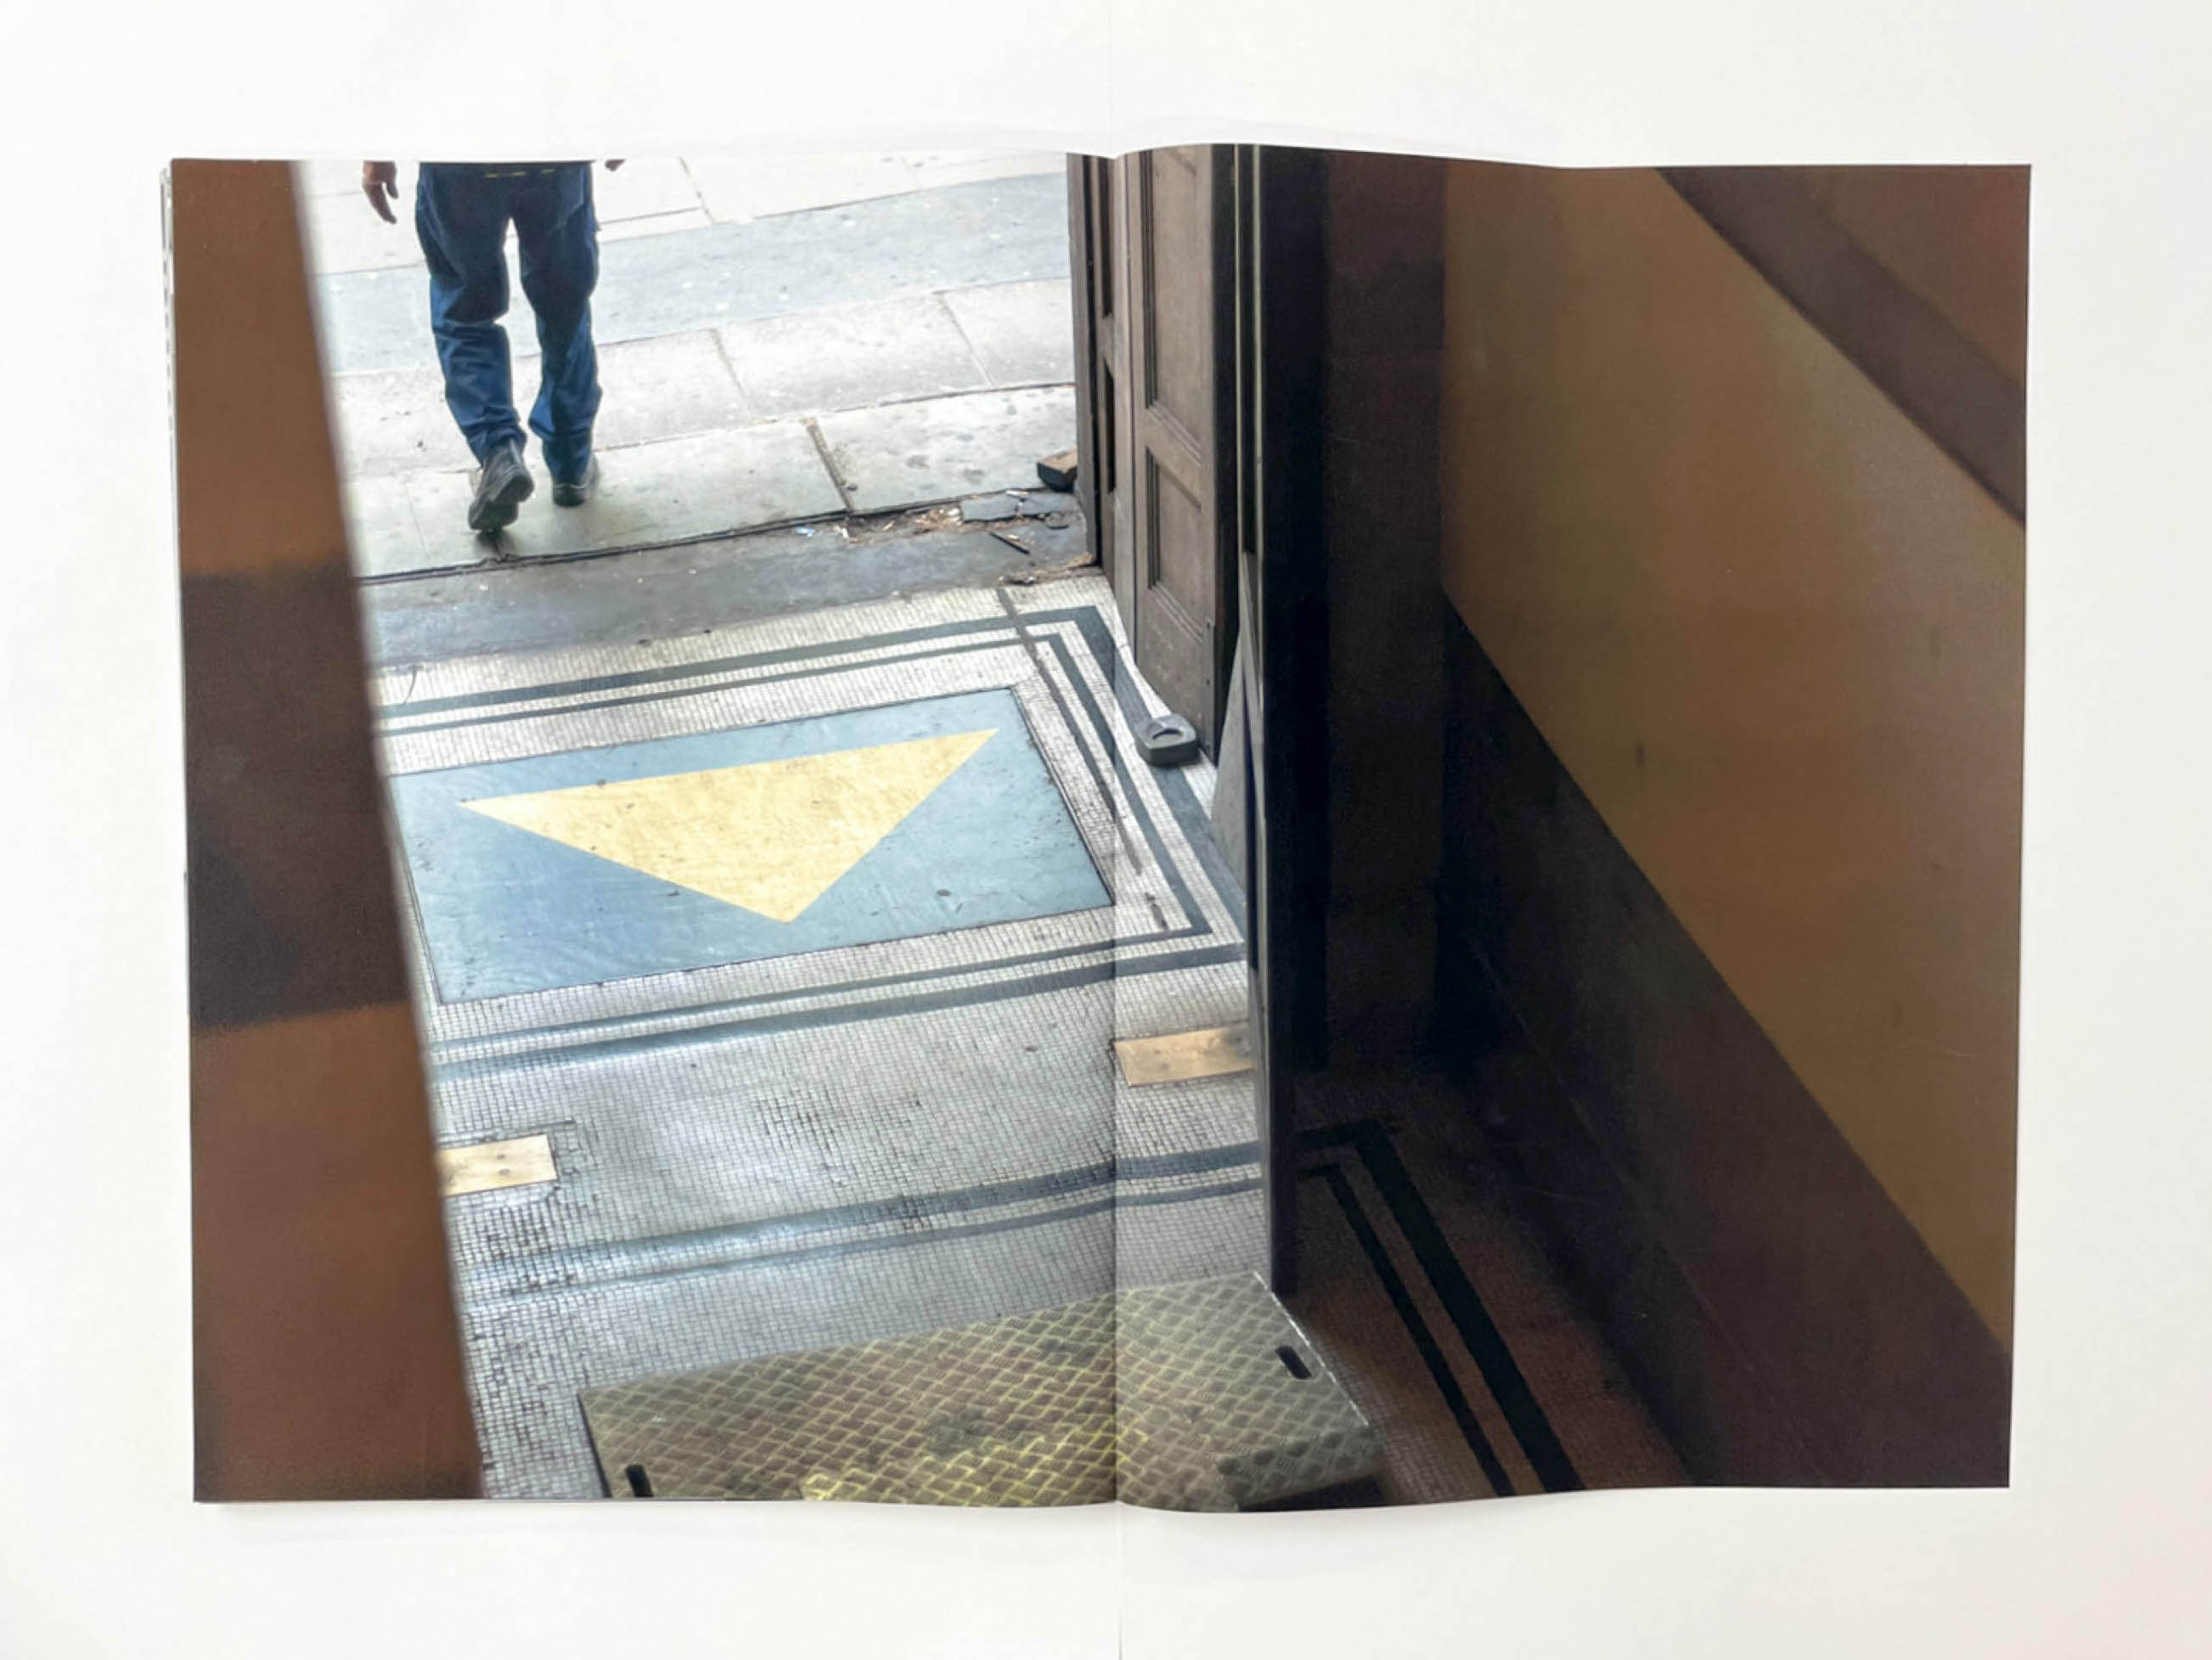 the mosaic floor of a corridor with a door opening onto a pavement on which a man in blue jeans is walking away